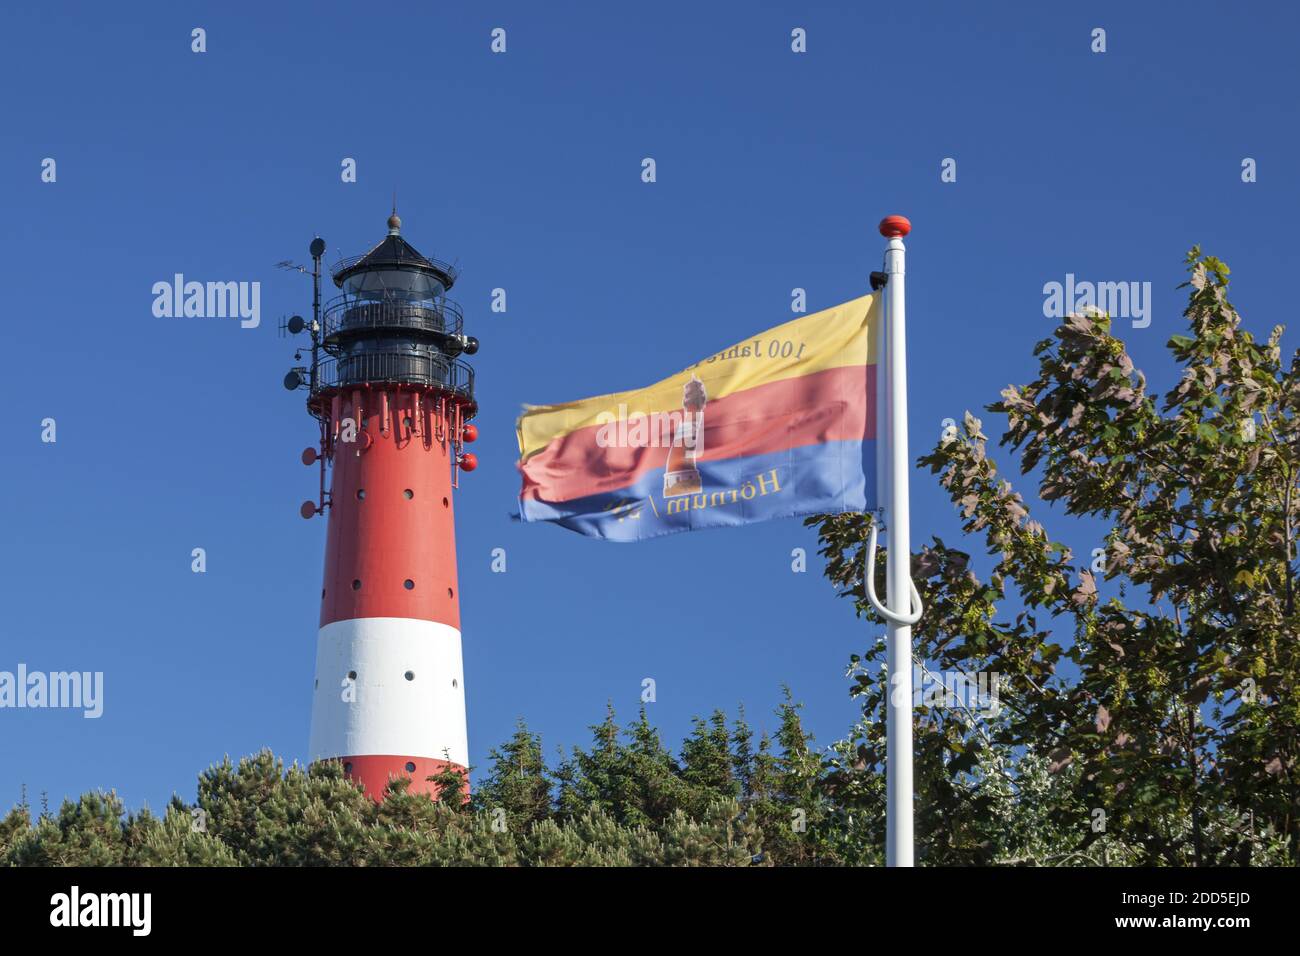 Page 4 - Hornum Germany High Resolution Stock Photography and Images - Alamy